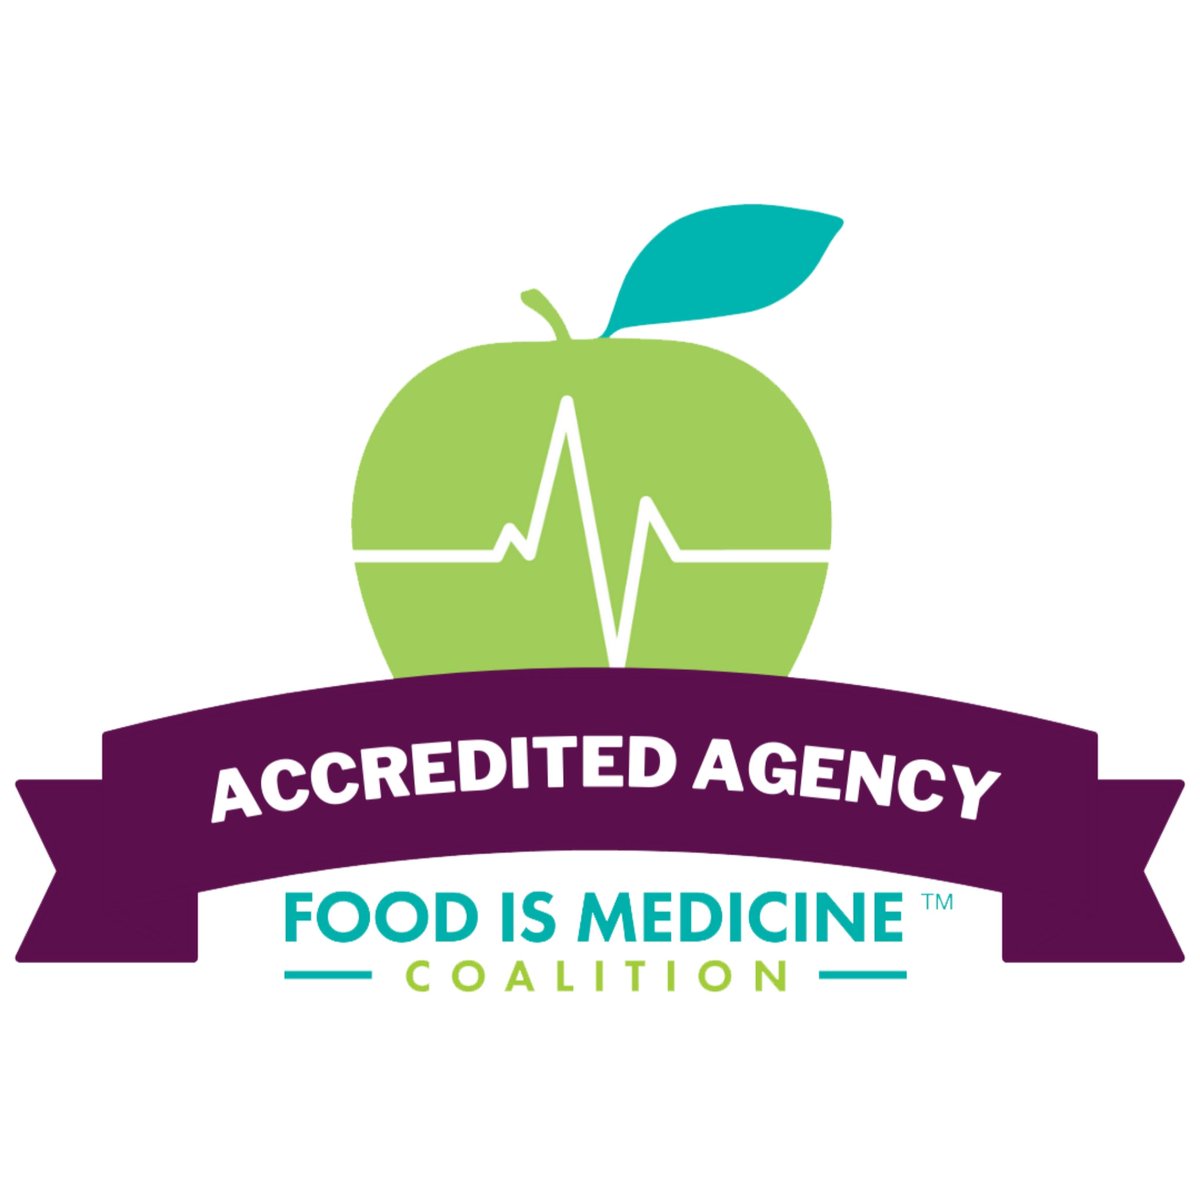 Breaking News: Today, @fimcoalition released the first-ever Medically Tailored Meal Intervention Standard for the field, the Accreditation Criteria and Requirements (ACR). Project Angel Food is among the first organizations to receive accreditation.